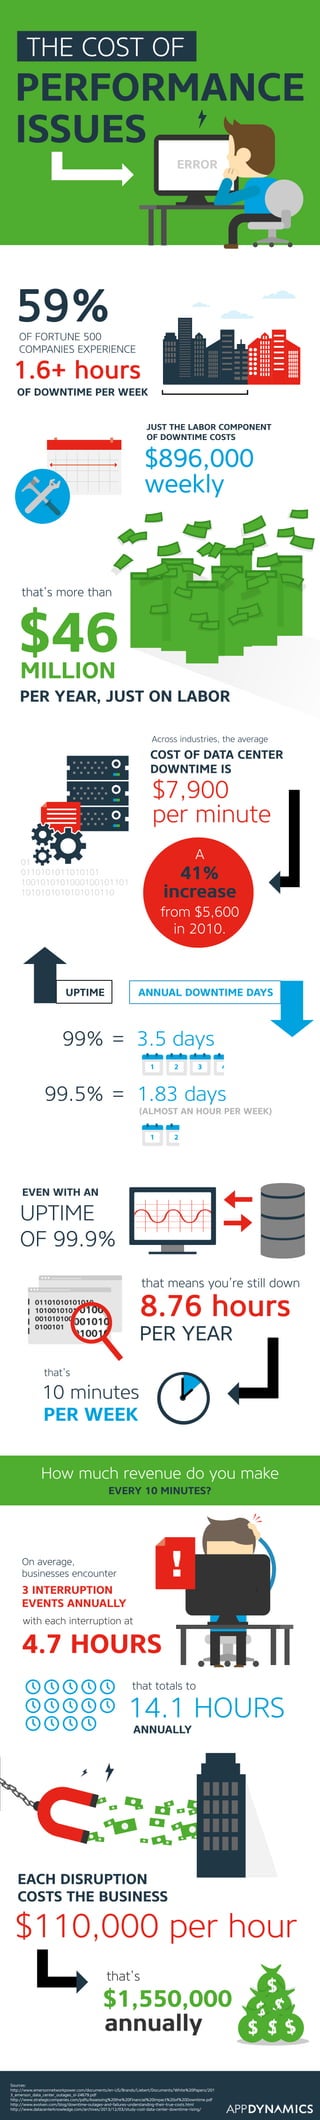 PERFORMANCE
ISSUES
ERROR
59%
1.6+ hours
OF DOWNTIME PER WEEK
OF FORTUNE 500
COMPANIES EXPERIENCE
$896,000
weekly
JUST THE LABOR COMPONENT
OF DOWNTIME COSTS
THE COST OF
MILLION
PER YEAR, JUST ON LABOR
that’s more than
$46
$7,900
per minute
Across industries, the average
COST OF DATA CENTER
DOWNTIME IS
from $5,600
in 2010.
A
41%
increase
01
0110101011010101
1001010101000100101101
1010101010101010110
99%
99.5%
3.5 days
1.83 days
=
=
ANNUAL DOWNTIME DAYS
(ALMOST AN HOUR PER WEEK)
UPTIME
8.76 hours
PER YEAR
that means you’re still down
EVEN WITH AN
UPTIME
OF 99.9%
1
1 2 3 4
2
01101010101010
10100101010101
00101010001010
0100101
01101010101010
10100101010101
00101010001010
0100101
10 minutes
PER WEEK
that’s
How much revenue do you make
EVERY 10 MINUTES?
4.7 HOURS
with each interruption at
On average,
businesses encounter
3 INTERRUPTION
EVENTS ANNUALLY
that totals to
14.1 HOURS
ANNUALLY
$110,000 per hour
EACH DISRUPTION
COSTS THE BUSINESS
that’s
annually
$1,550,000
$
$ $$ $
$ $ $$ $ $
Sources:
http://www.emersonnetworkpower.com/documents/en-US/Brands/Liebert/Documents/White%20Papers/201
3_emerson_data_center_outages_sl-24679.pdf
http://www.strategiccompanies.com/pdfs/Assessing%20the%20Financial%20Impact%20of%20Downtime.pdf
http://www.evolven.com/blog/downtime-outages-and-failures-understanding-their-true-costs.html
http://www.datacenterknowledge.com/archives/2013/12/03/study-cost-data-center-downtime-rising/
 